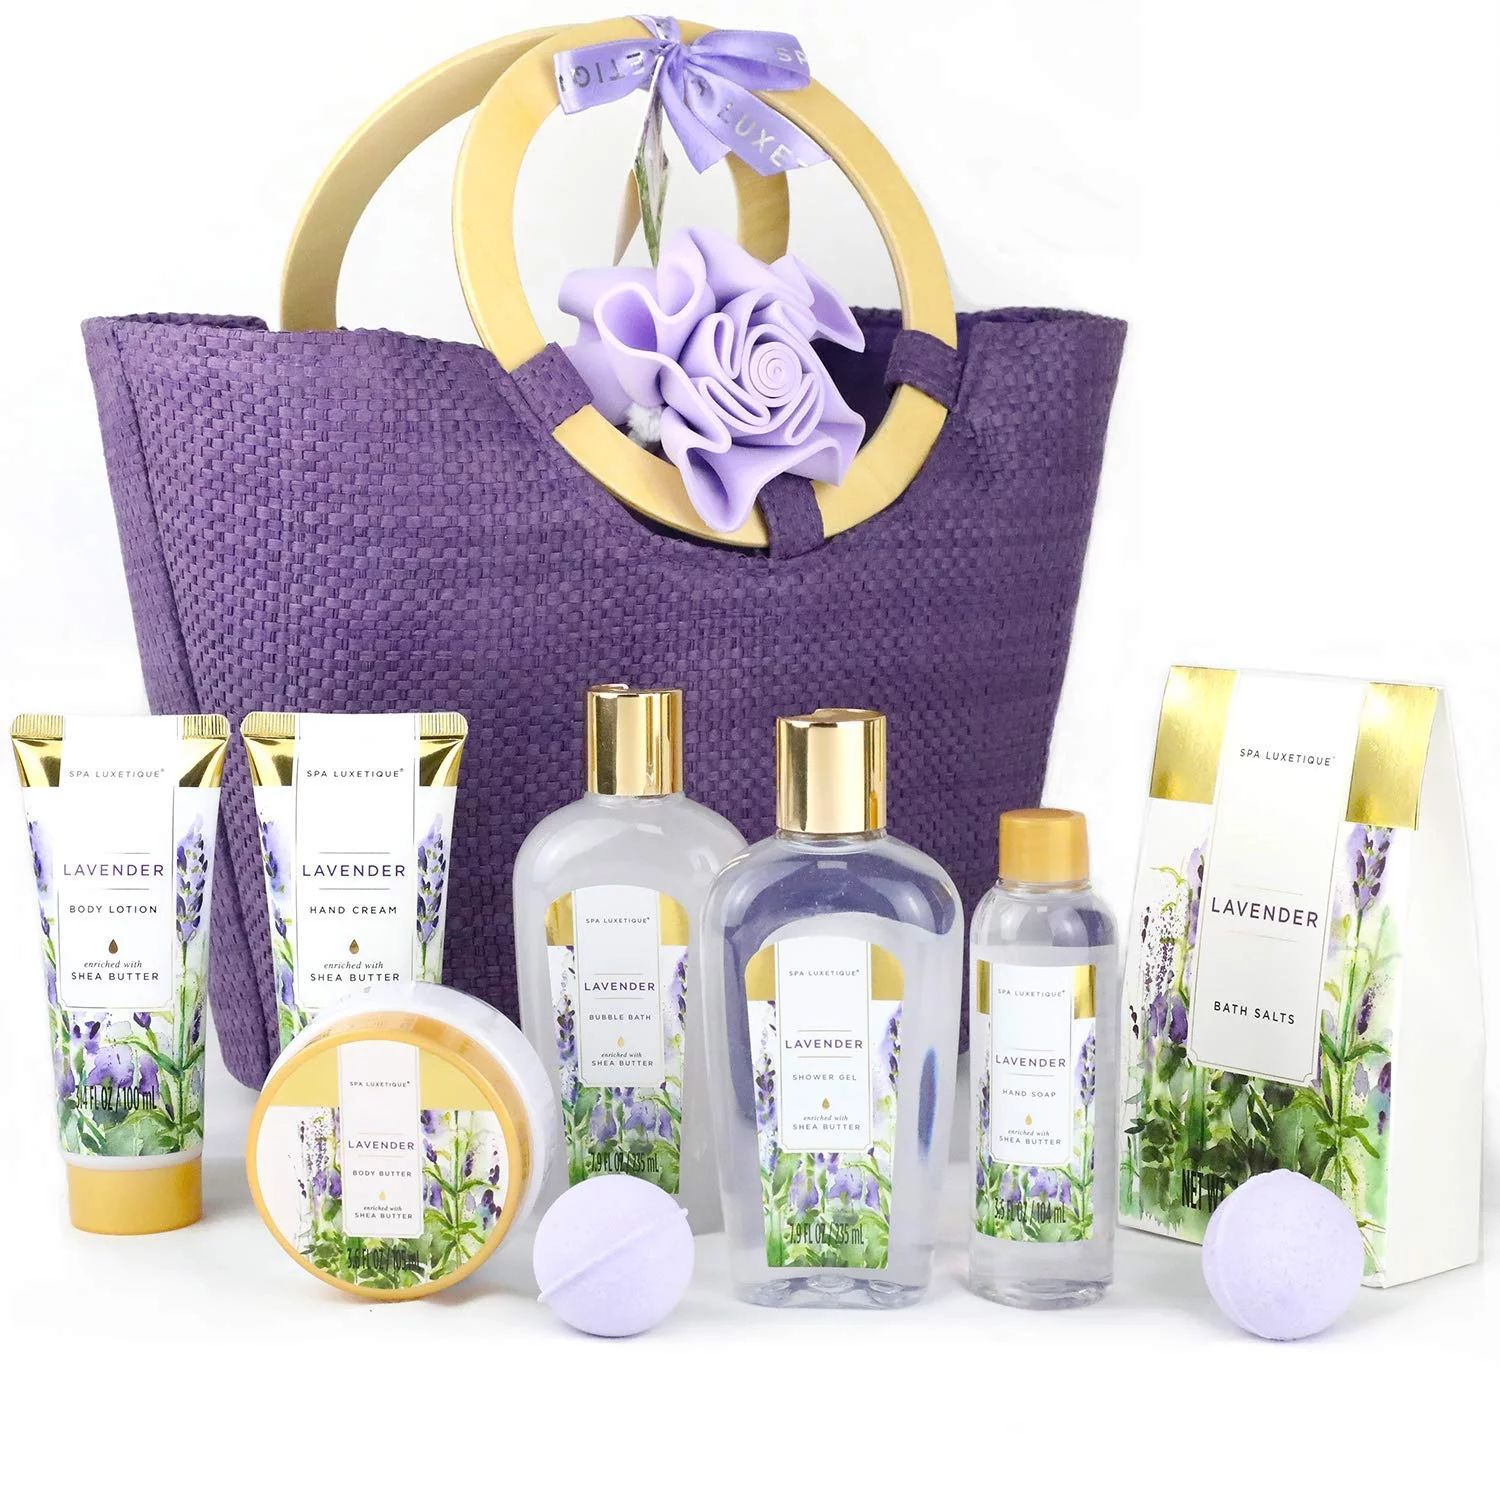 Spa Luxetique Bath Gift Sets for Women Lavender Body Care Baskets - 10 Pcs Relaxing Holiday Birth... | Walmart (US)